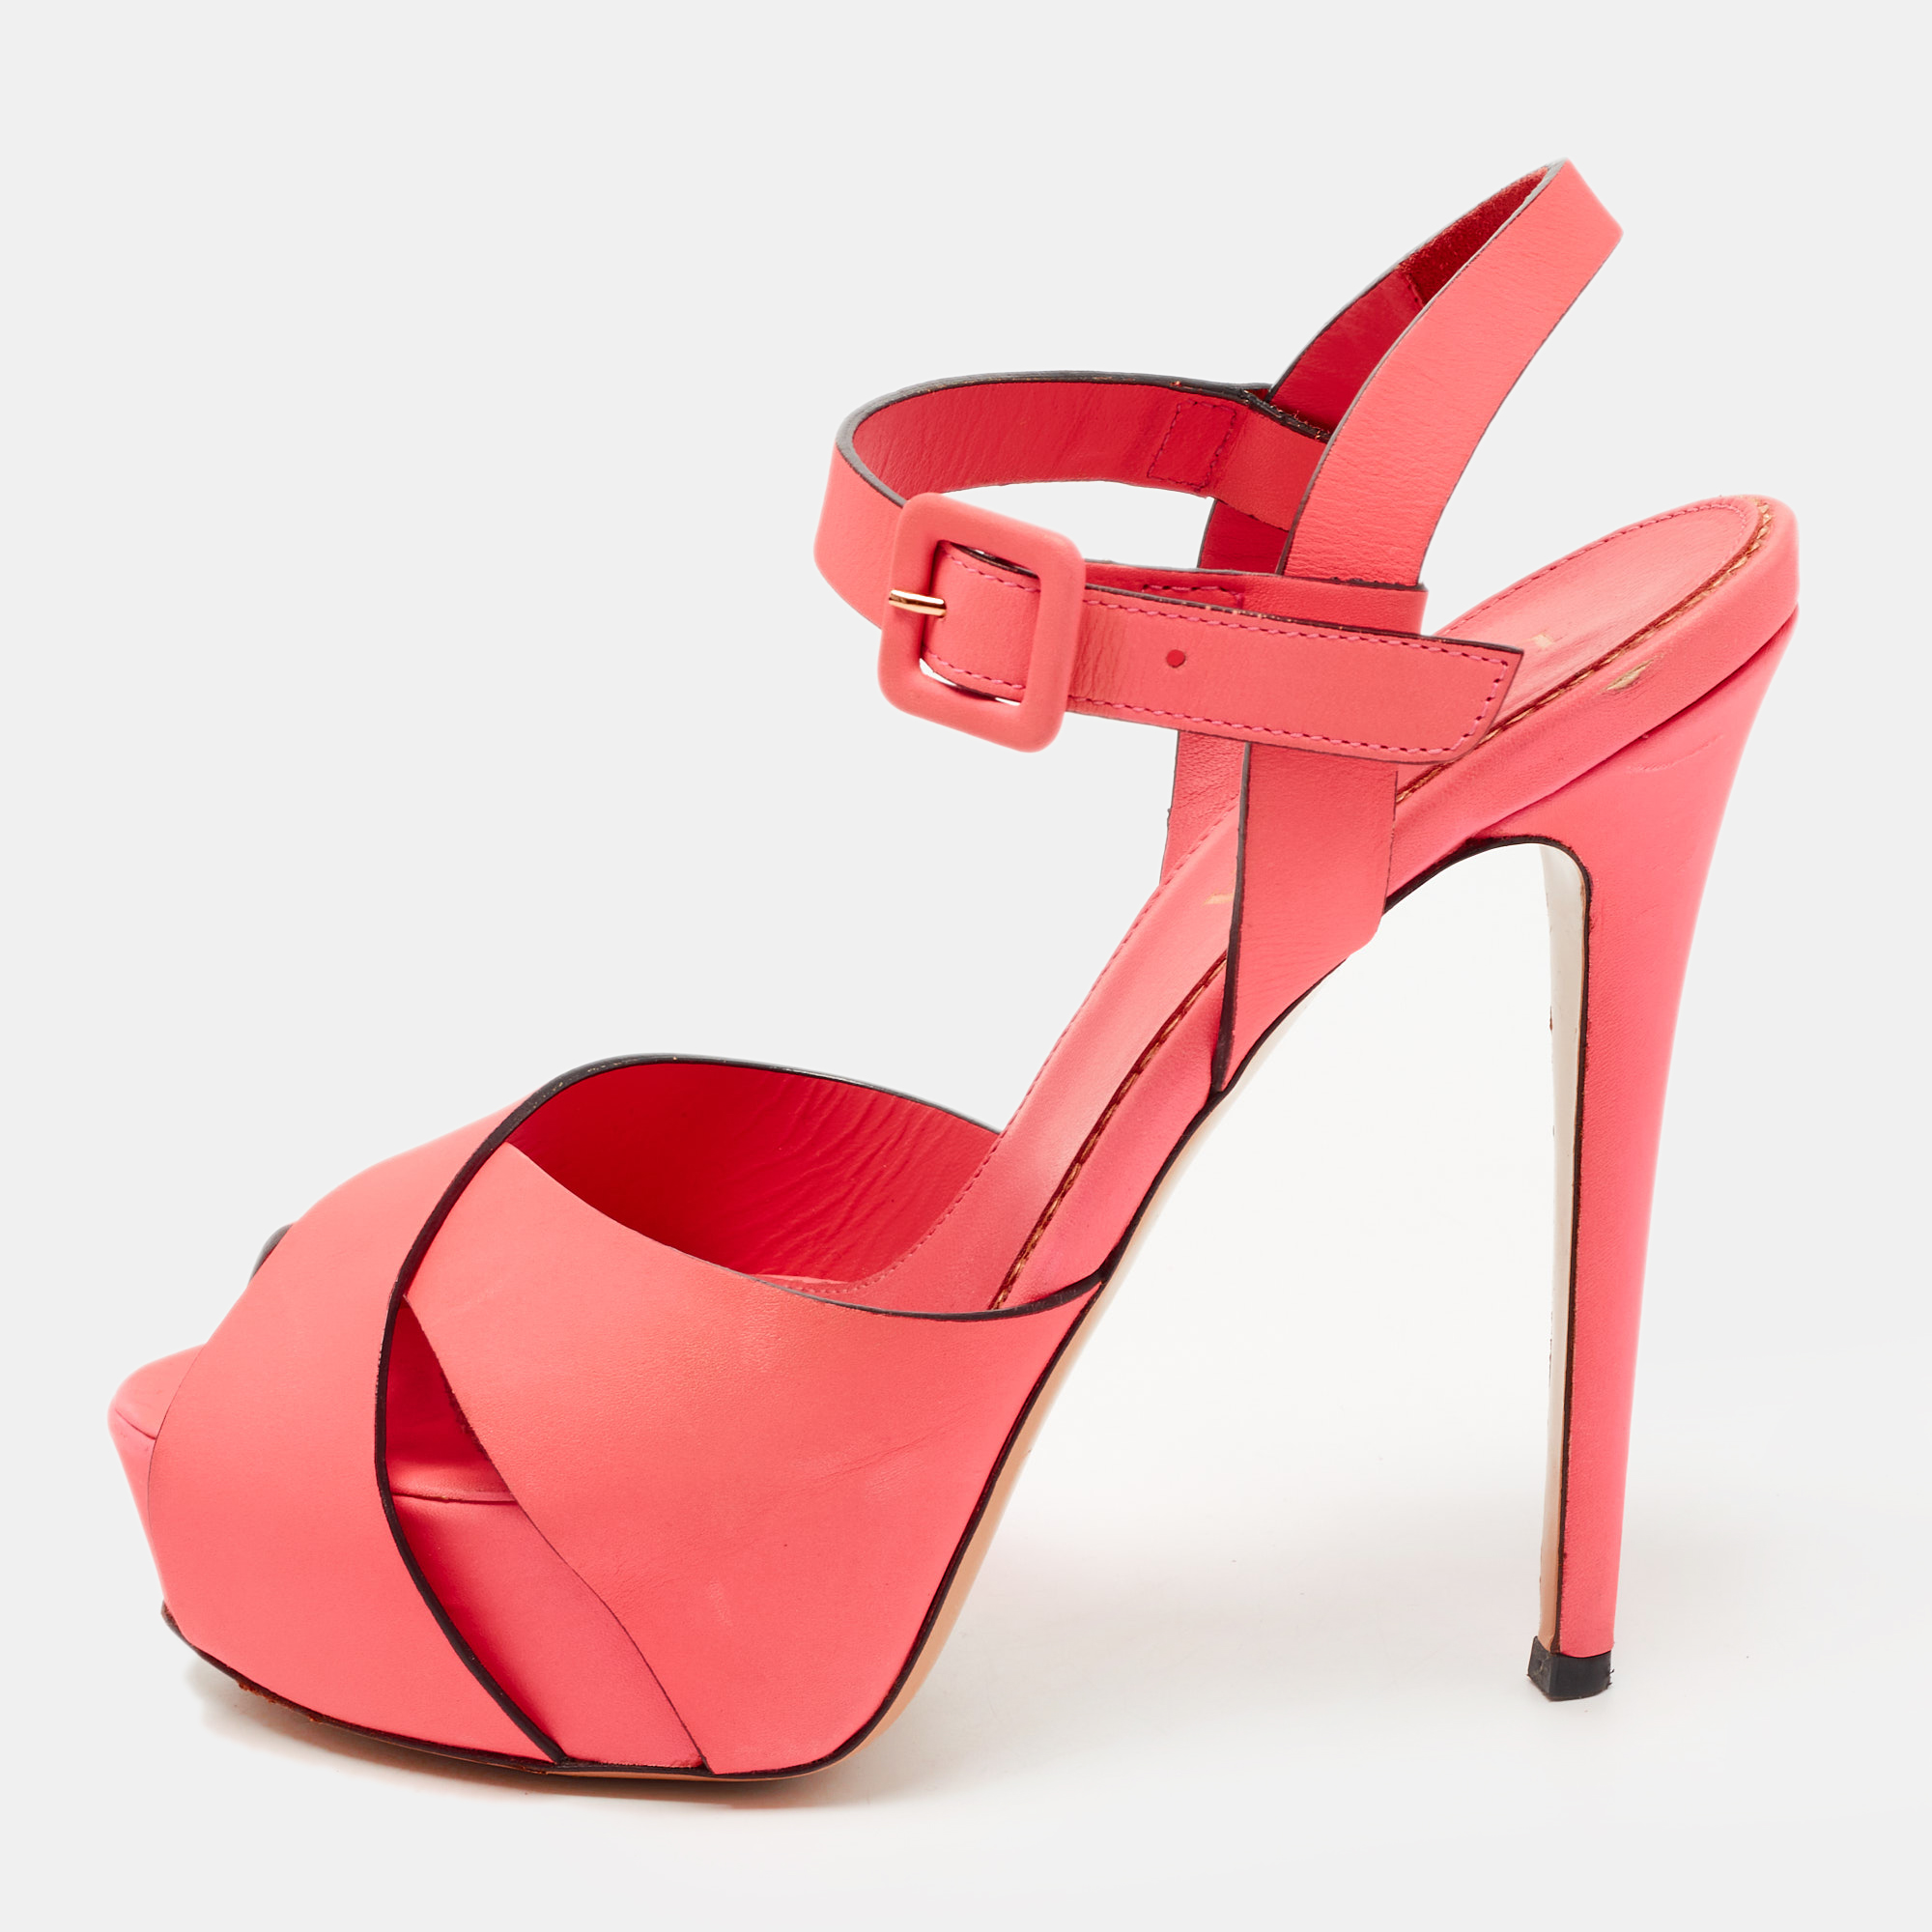 Pre-owned Le Silla Neon Pink Leather Platform Ankle Strap Sandals Size 37.5